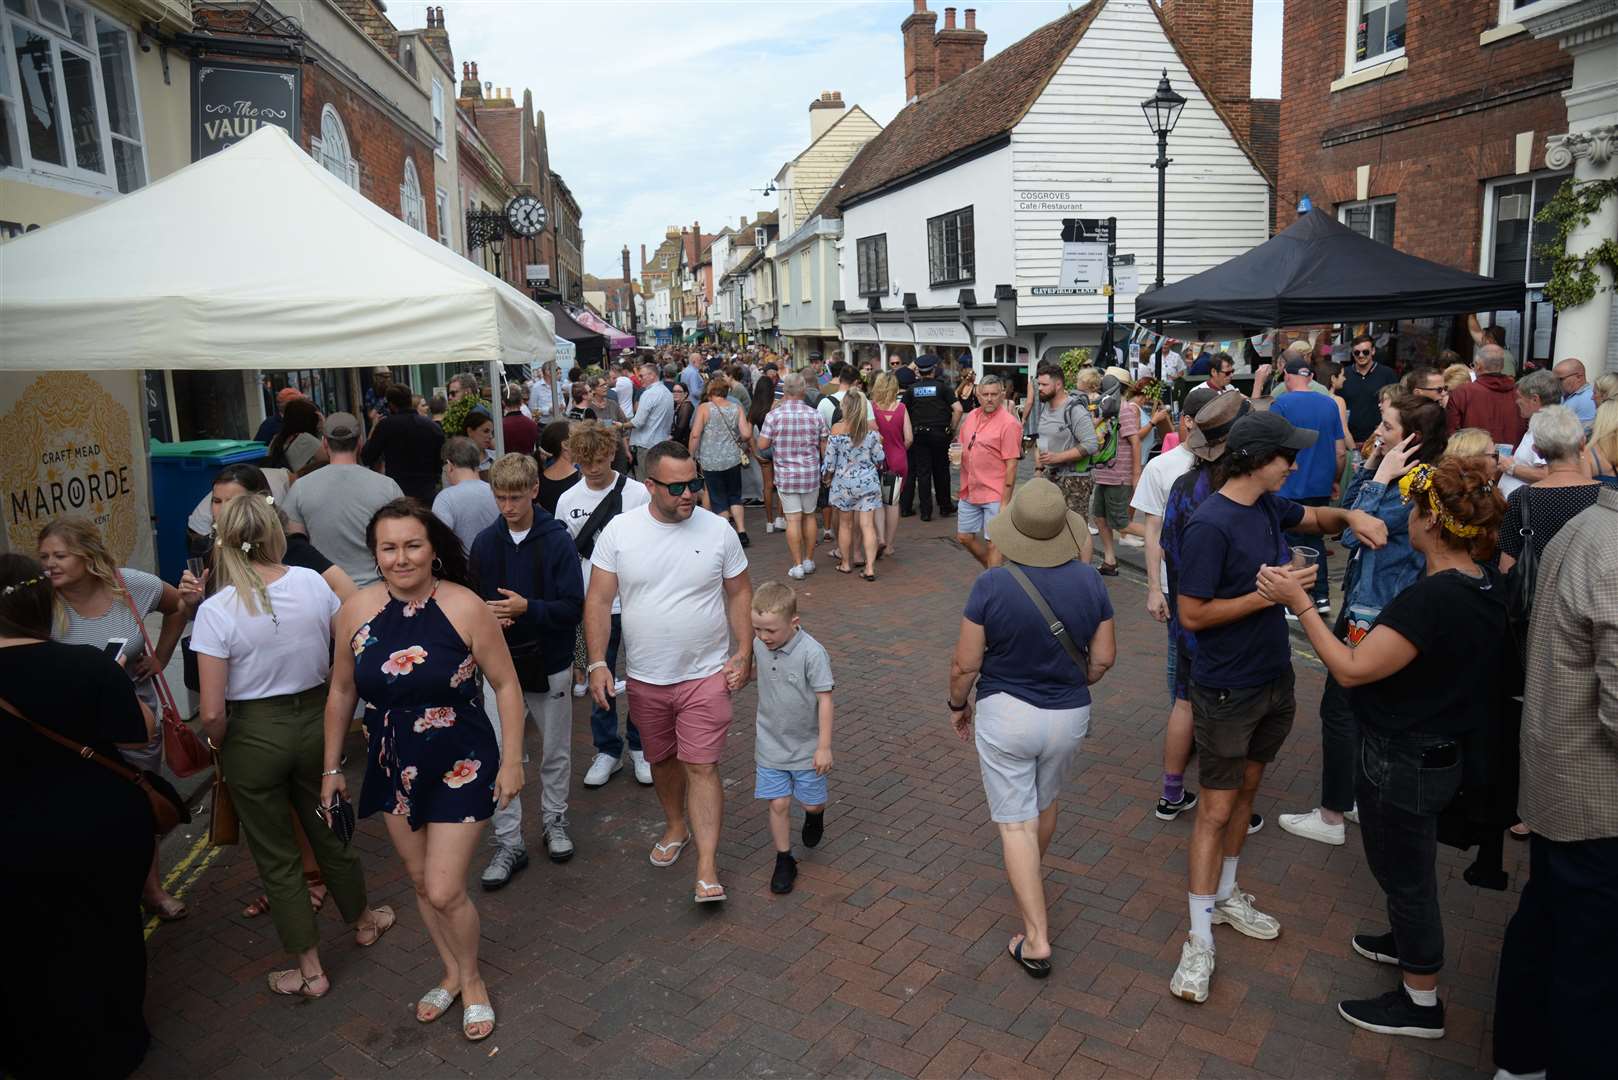 Preston Street during the hop festival in 2019. Picture: Chris Davey